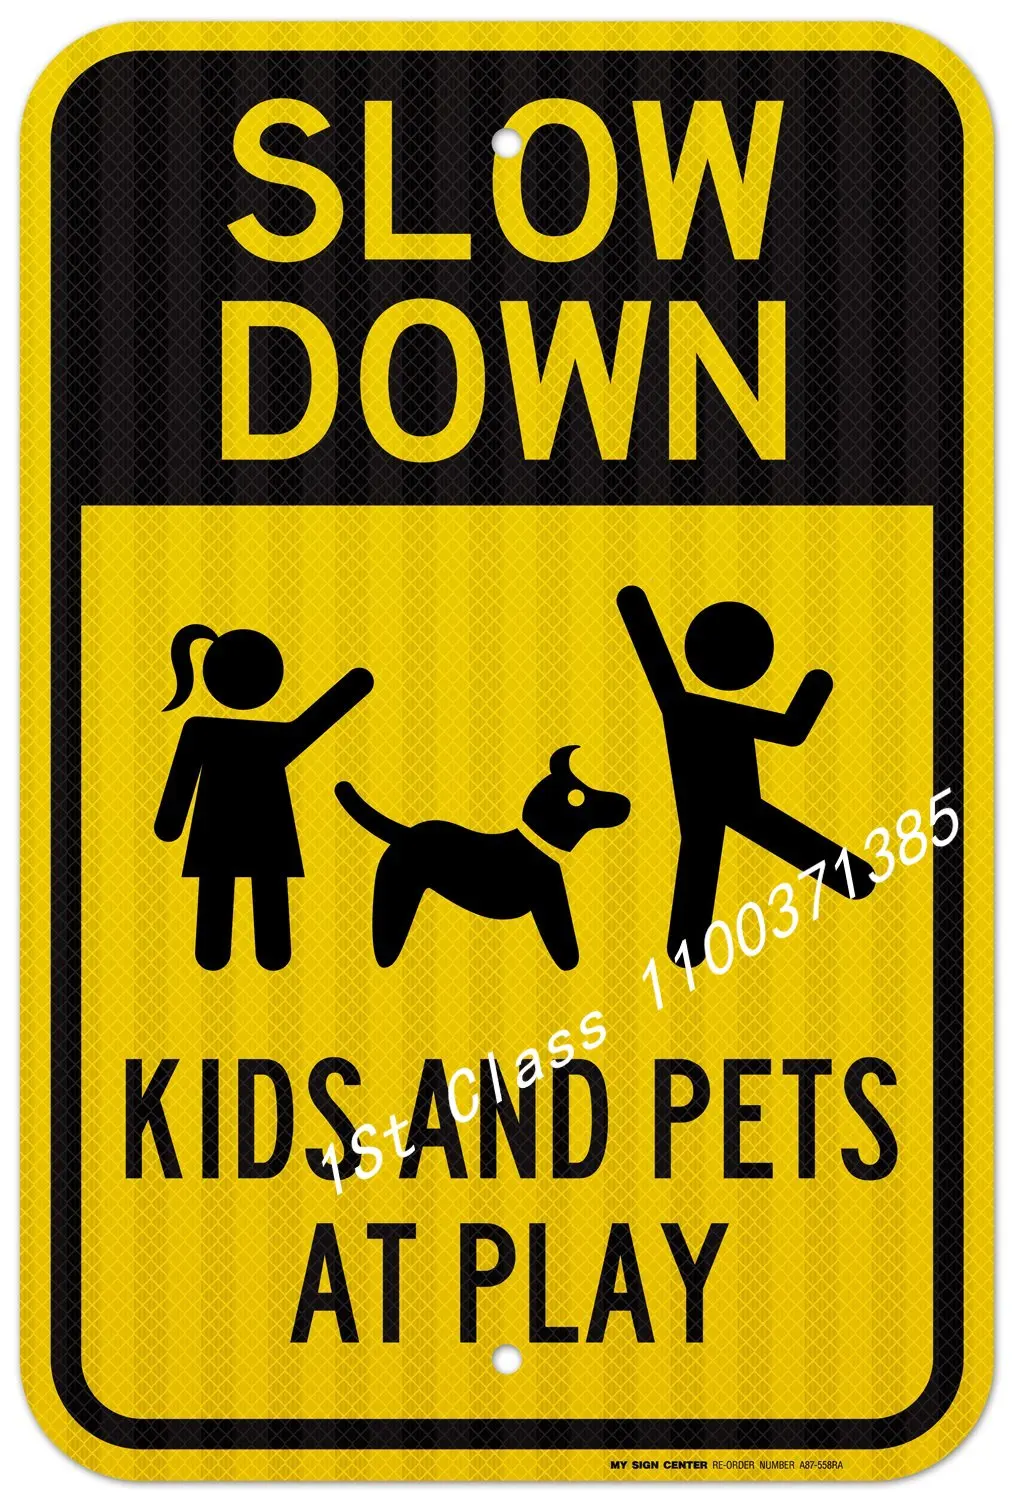 

Slow Down Kids at Play Sign Made Out of 3M Reflective Yellow Engineer Grade Prismatic .063 Rust Free Aluminum Indoor/Outdoor Use